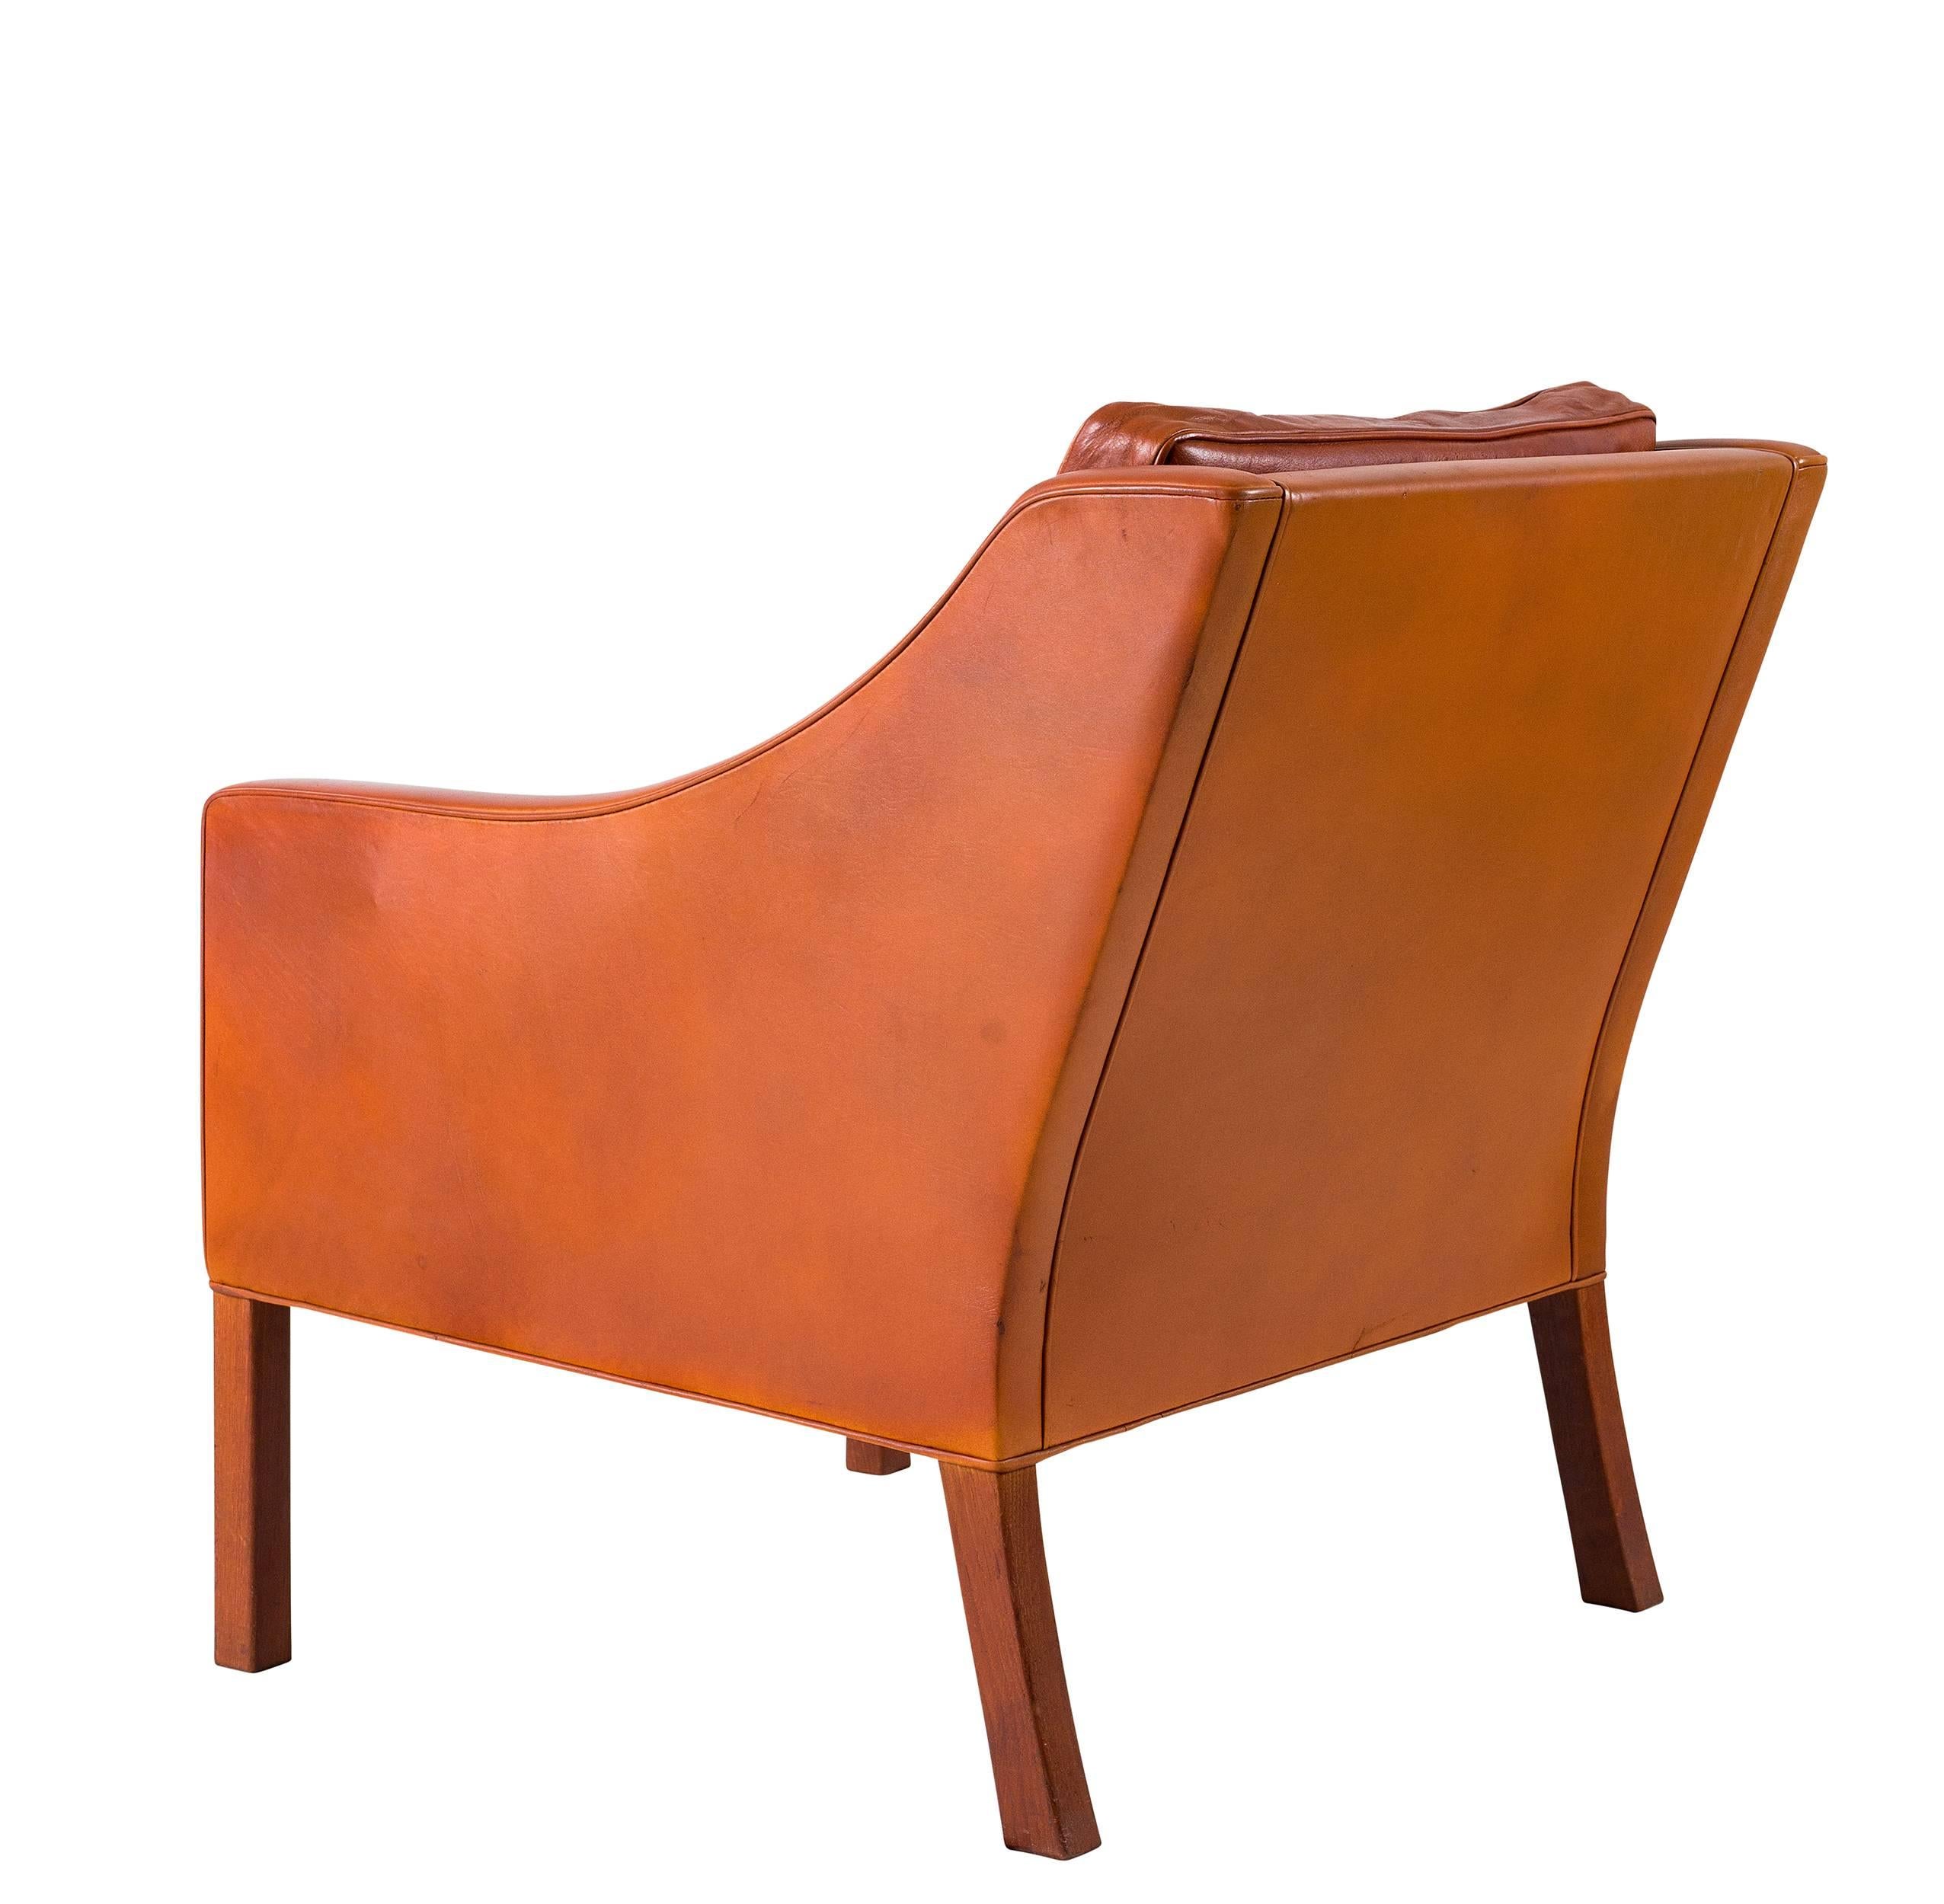 Mid-20th Century Børge Mogensen Model #2207 Leather Lounge Chair